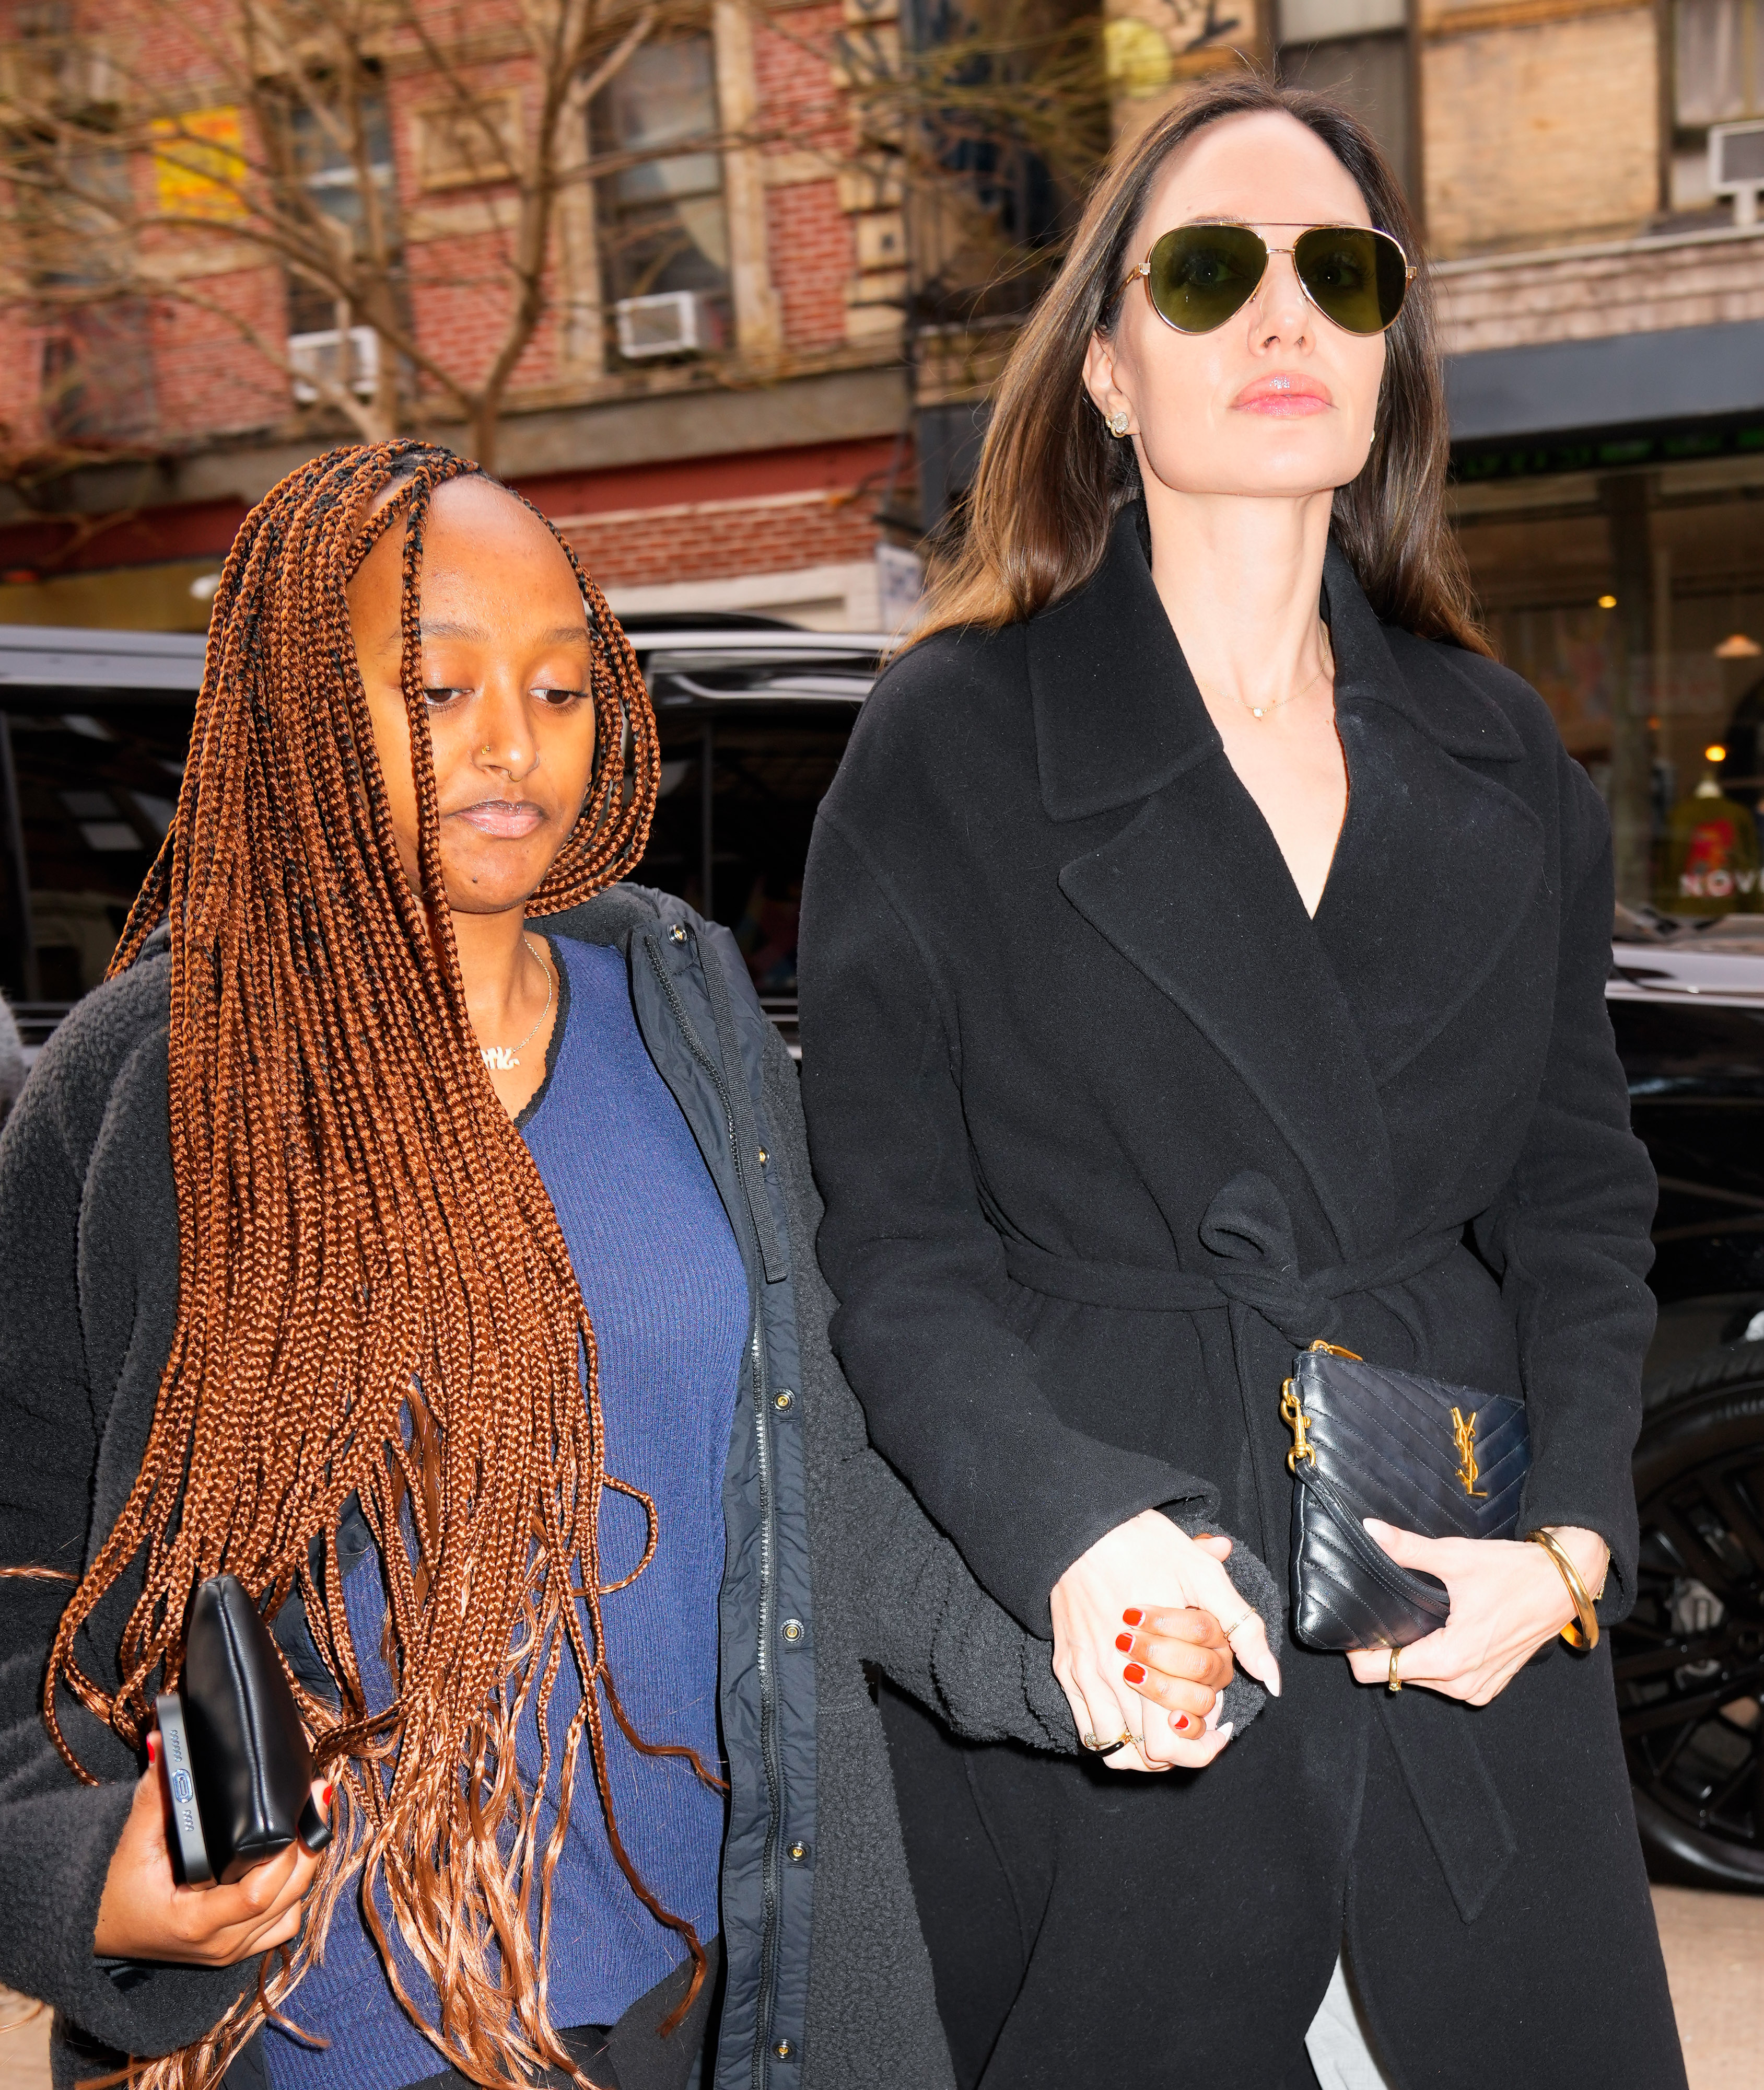 Angelina Jolie and Zahara Pitt-Jolie are seen in New York City on January 11, 2023 | Source: Getty Images